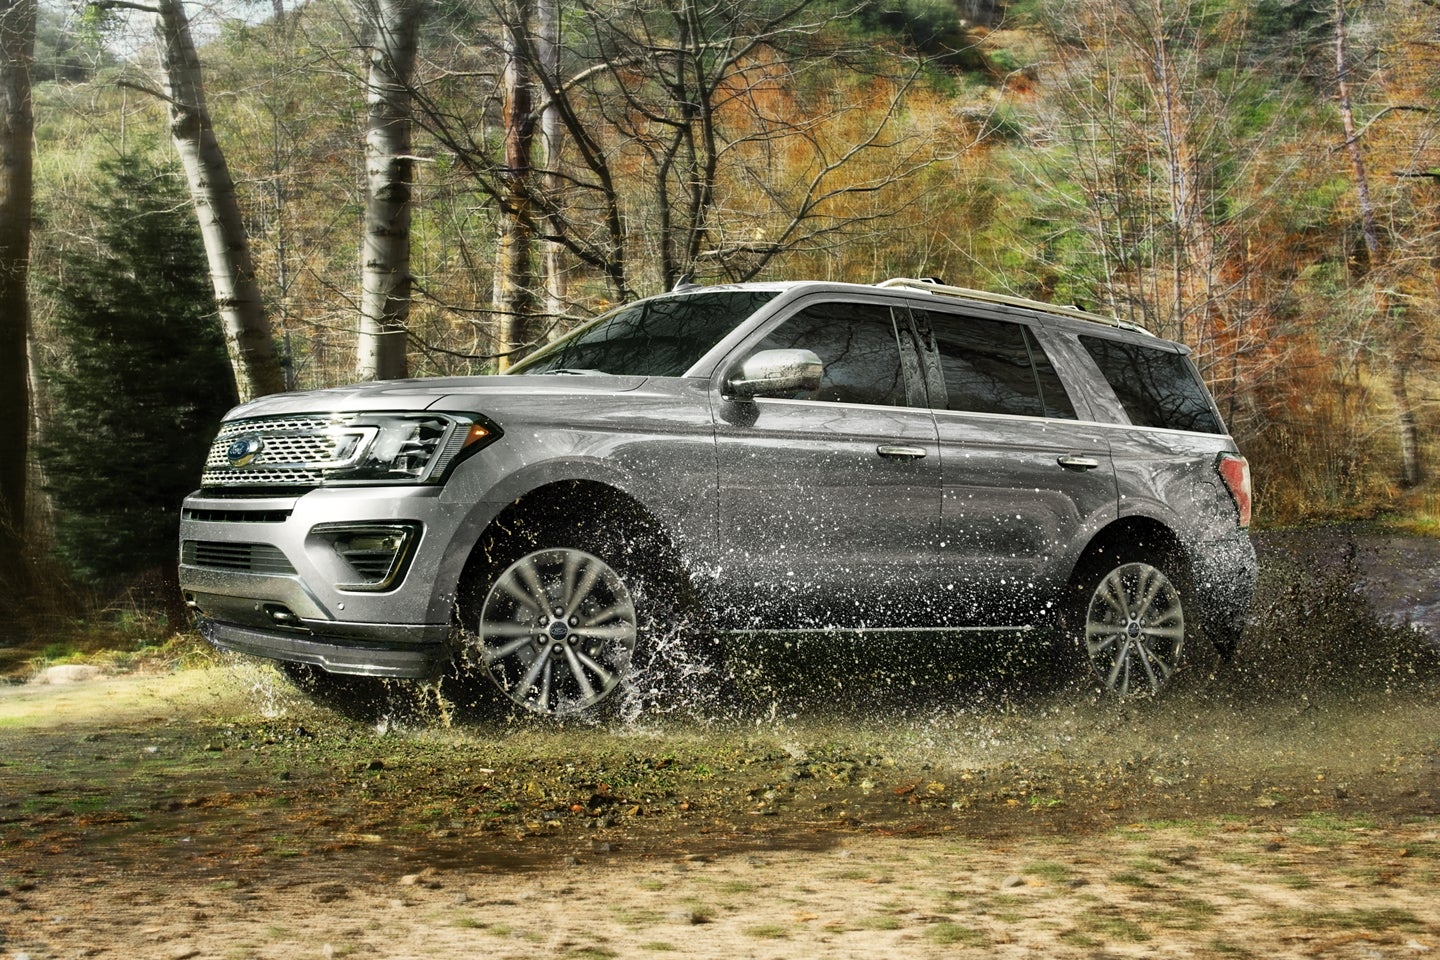 2020 Ford Expedition for Sale in Ozark, AL